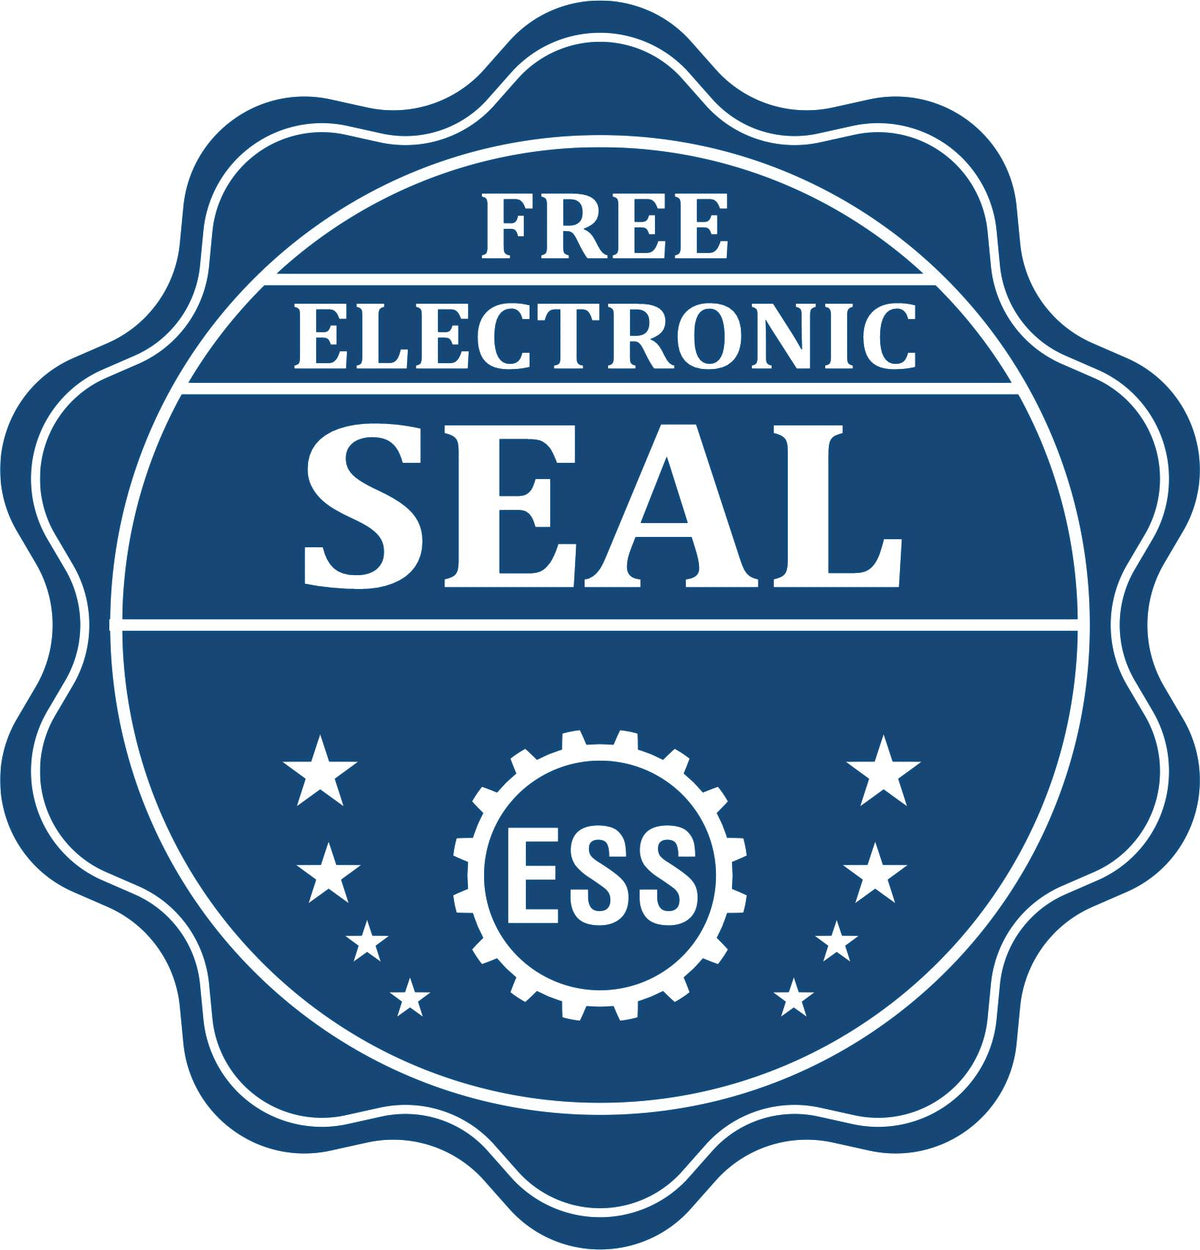 A badge showing a free electronic seal for the Gift Guam Engineer Seal with stars and the ESS gear on the emblem.